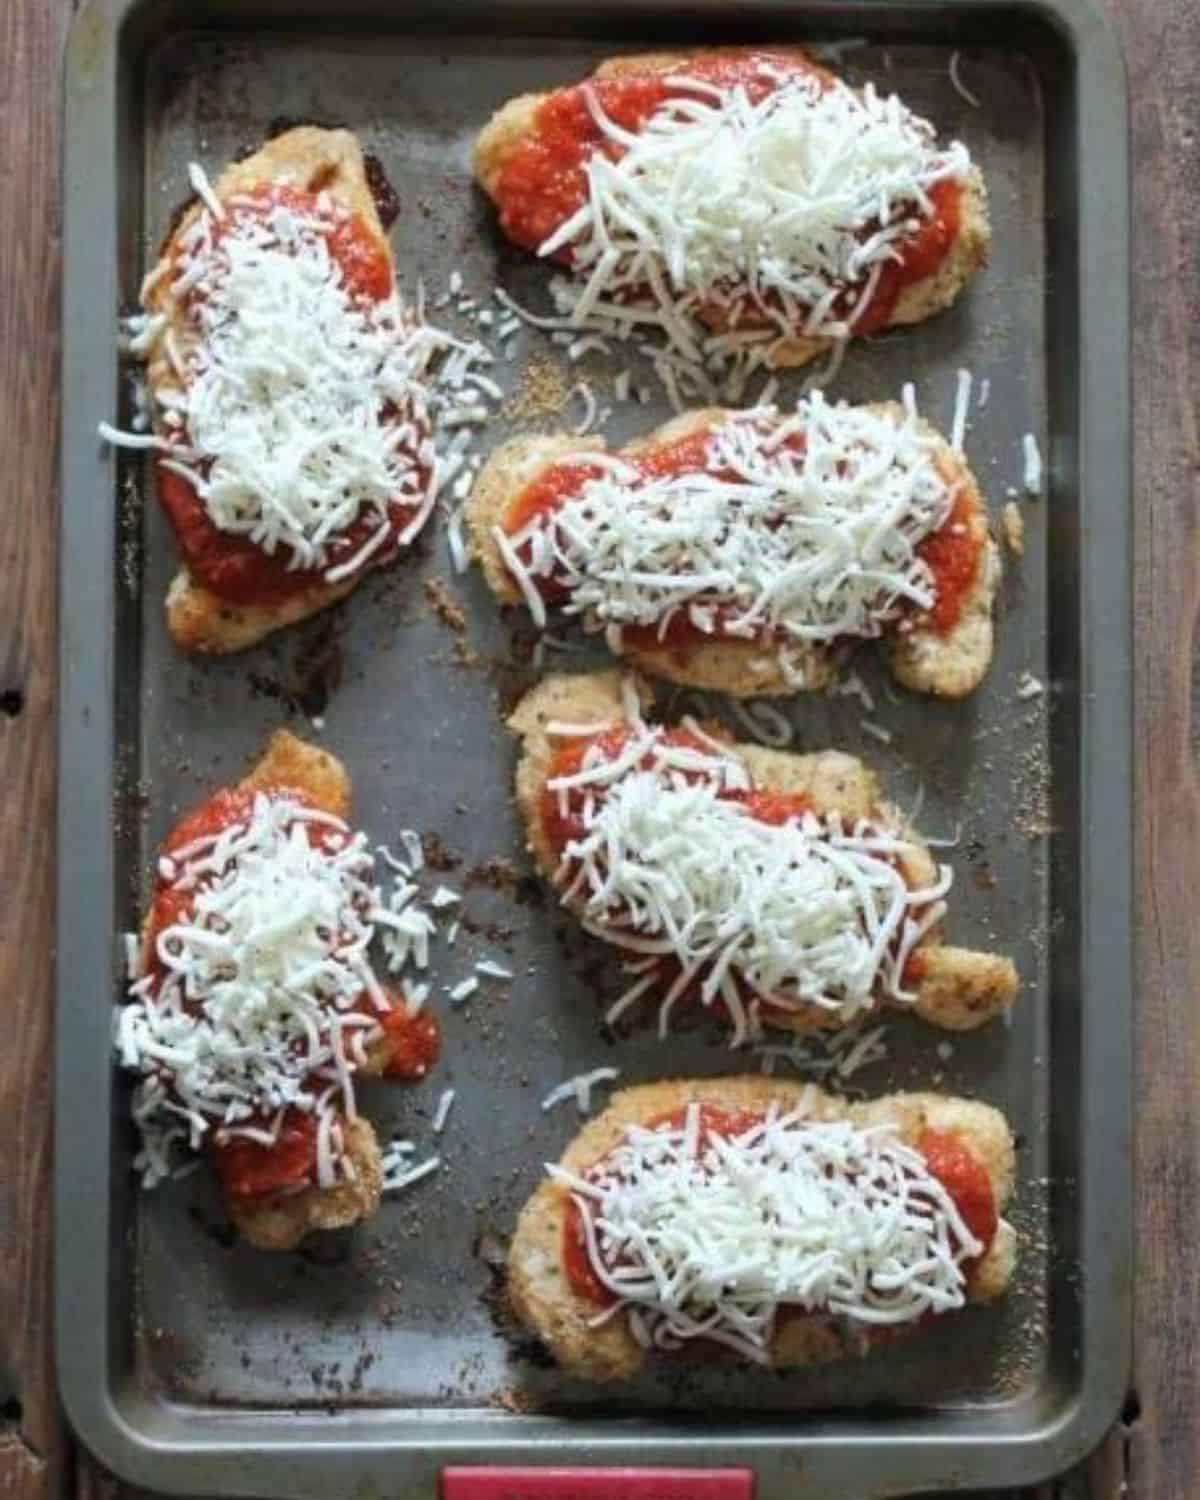 chicken cutlets baked with sauce and cheese added to the top.